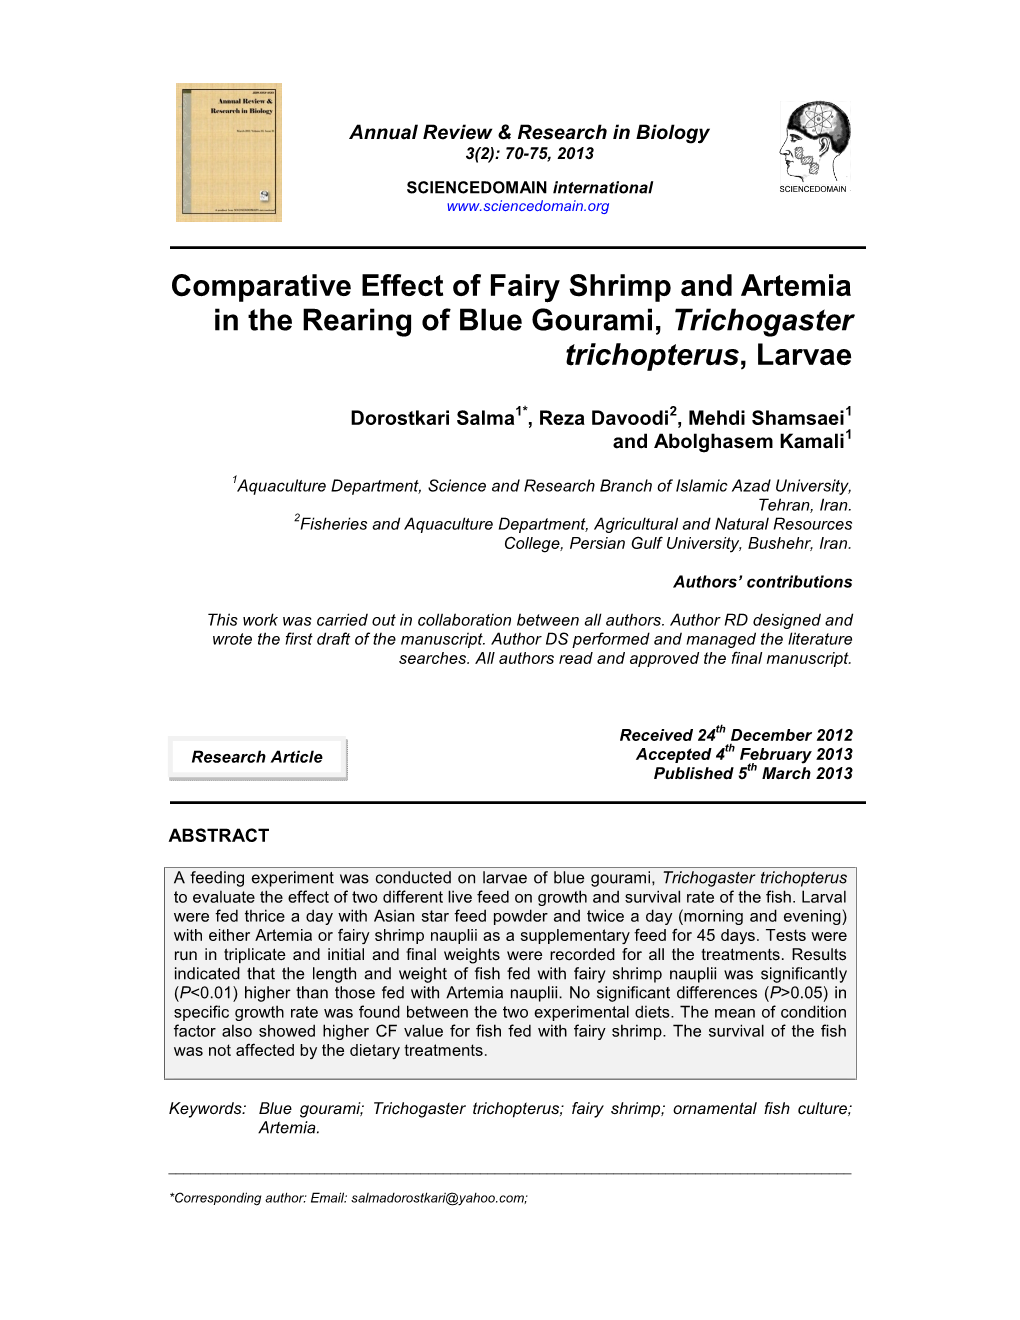 Comparative Effect of Fairy Shrimp and Artemia in the Rearing of Blue Gourami, Trichogaster Trichopterus, Larvae